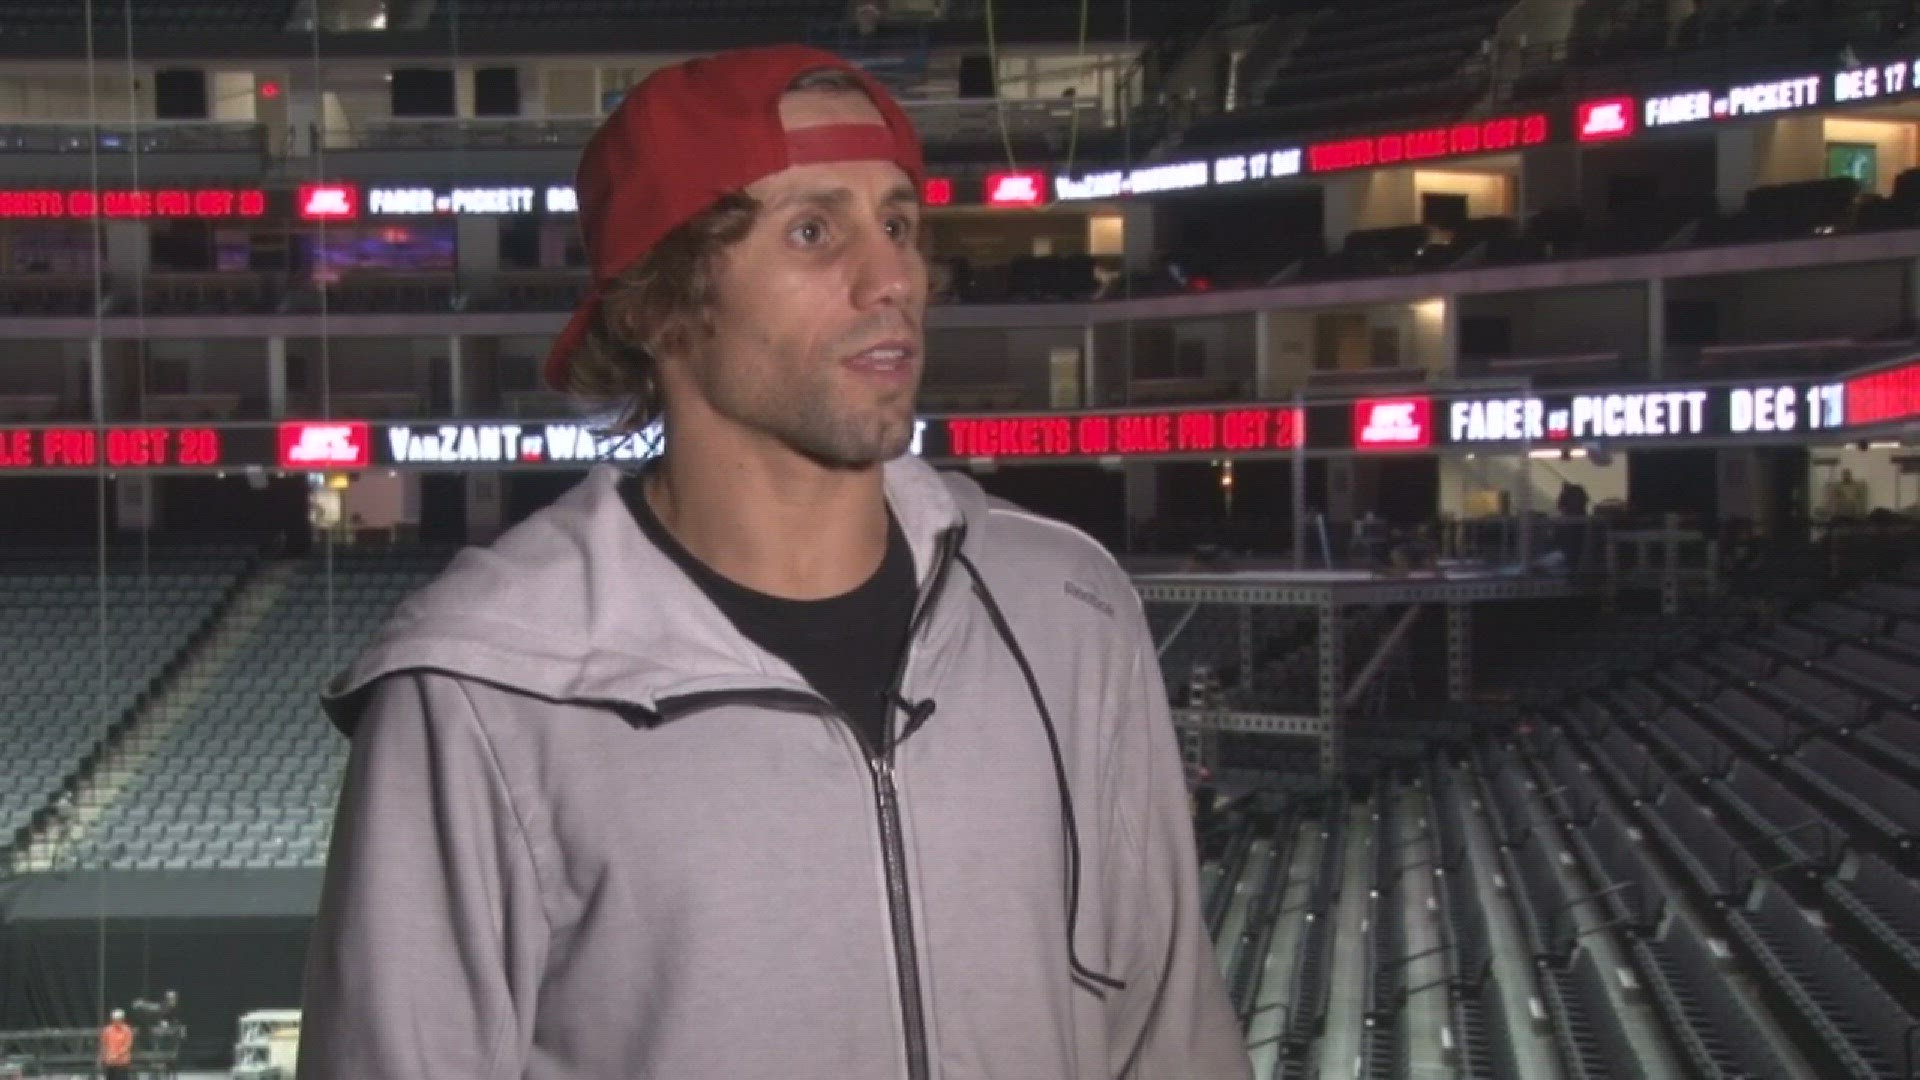 Sacramento native and UFC star Urijah Faber talks to ABC10's Pierre Noujaim and Sean Cunningham about being ready to call it a career following this Saturday's final fight against Brad Pickett.